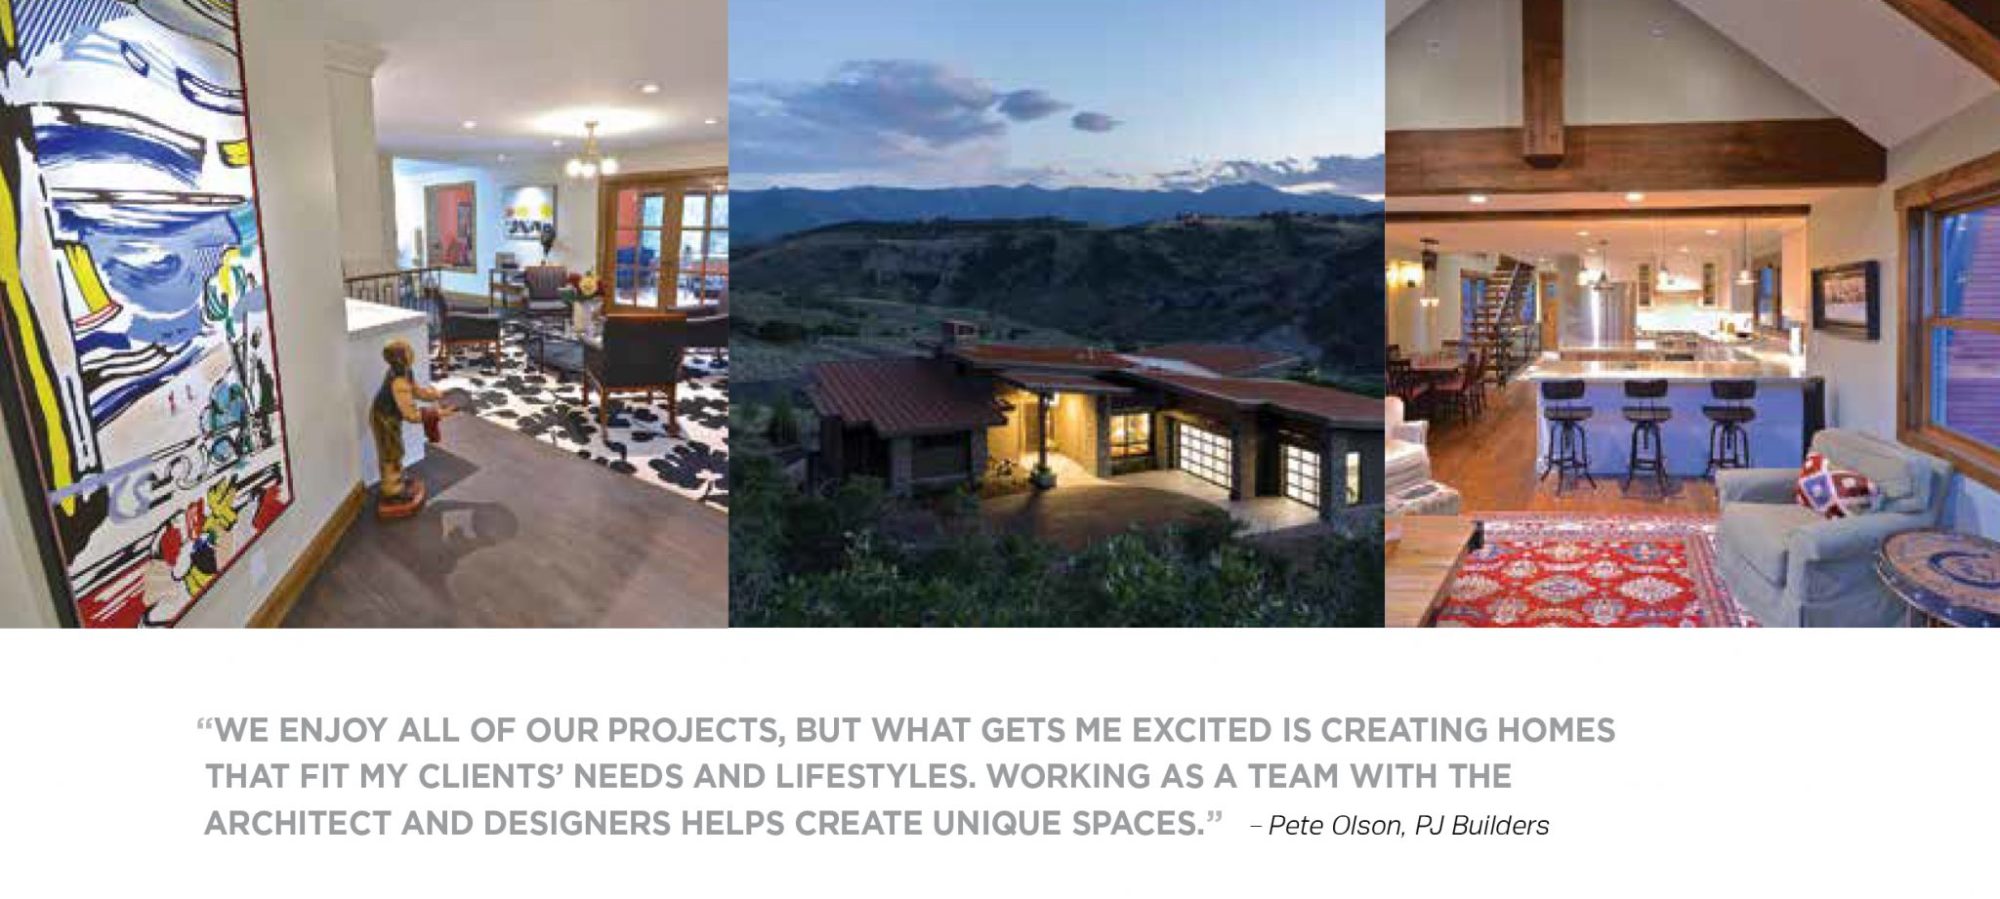 "We enjoy all of our projects, but what gets me excited is creating homes that fit my client's needs and lifestyles. Working as a team with the architect and designers helps create unique spaces" - Pete Olson of PJ Builders